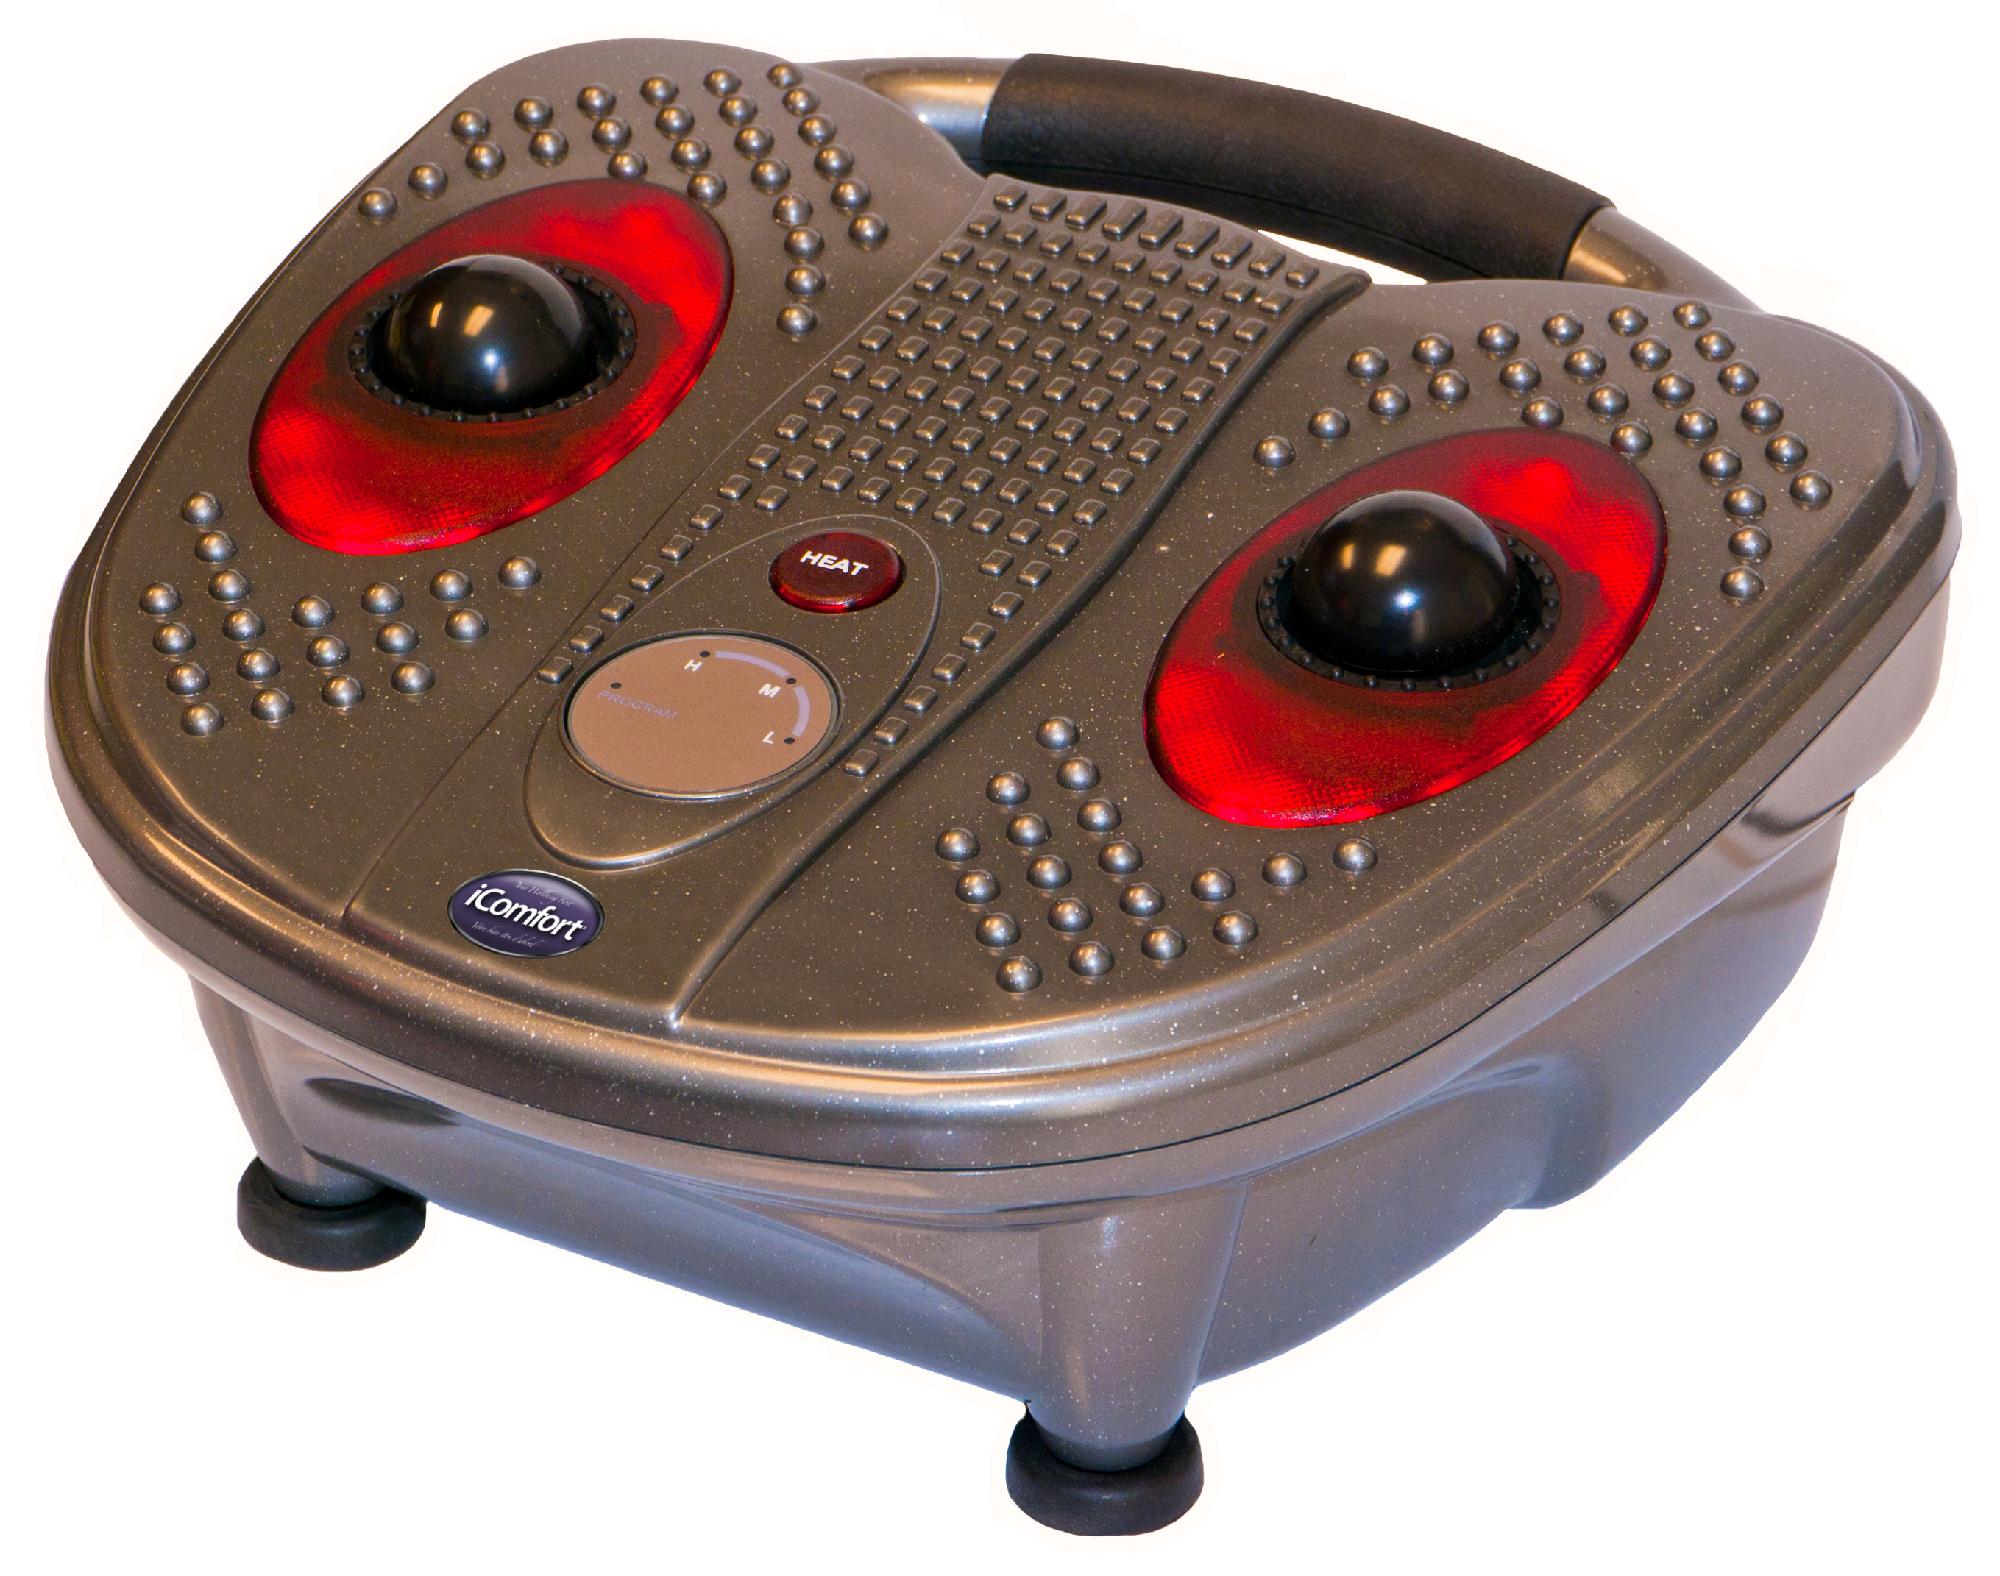 Serta Infrared and vibration foot massager